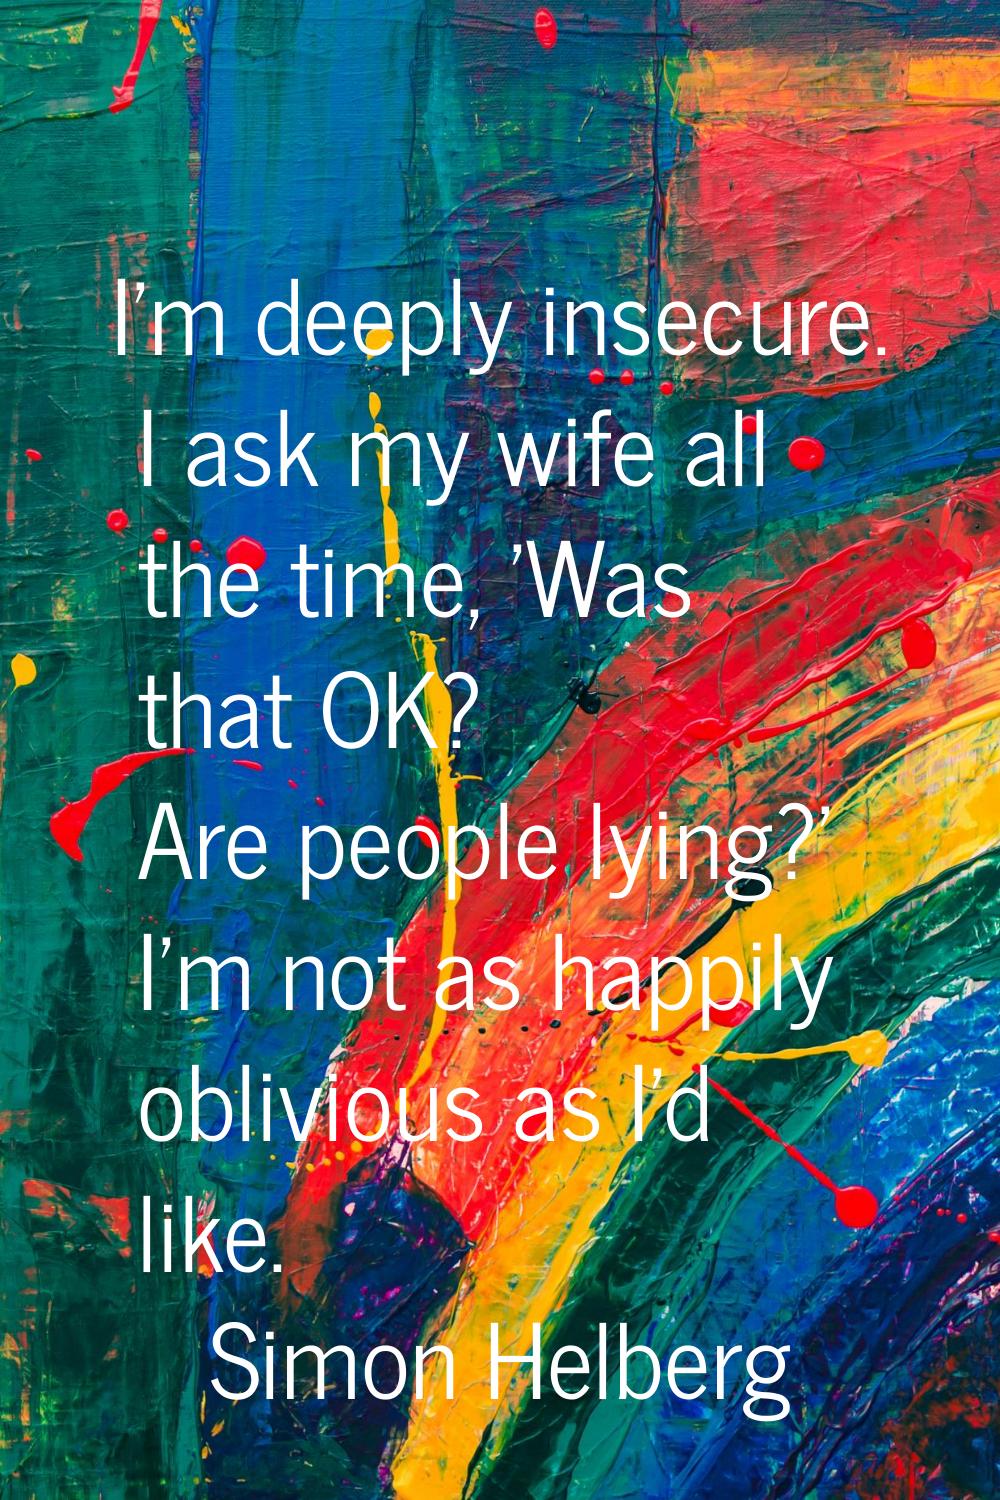 I'm deeply insecure. I ask my wife all the time, 'Was that OK? Are people lying?' I'm not as happil